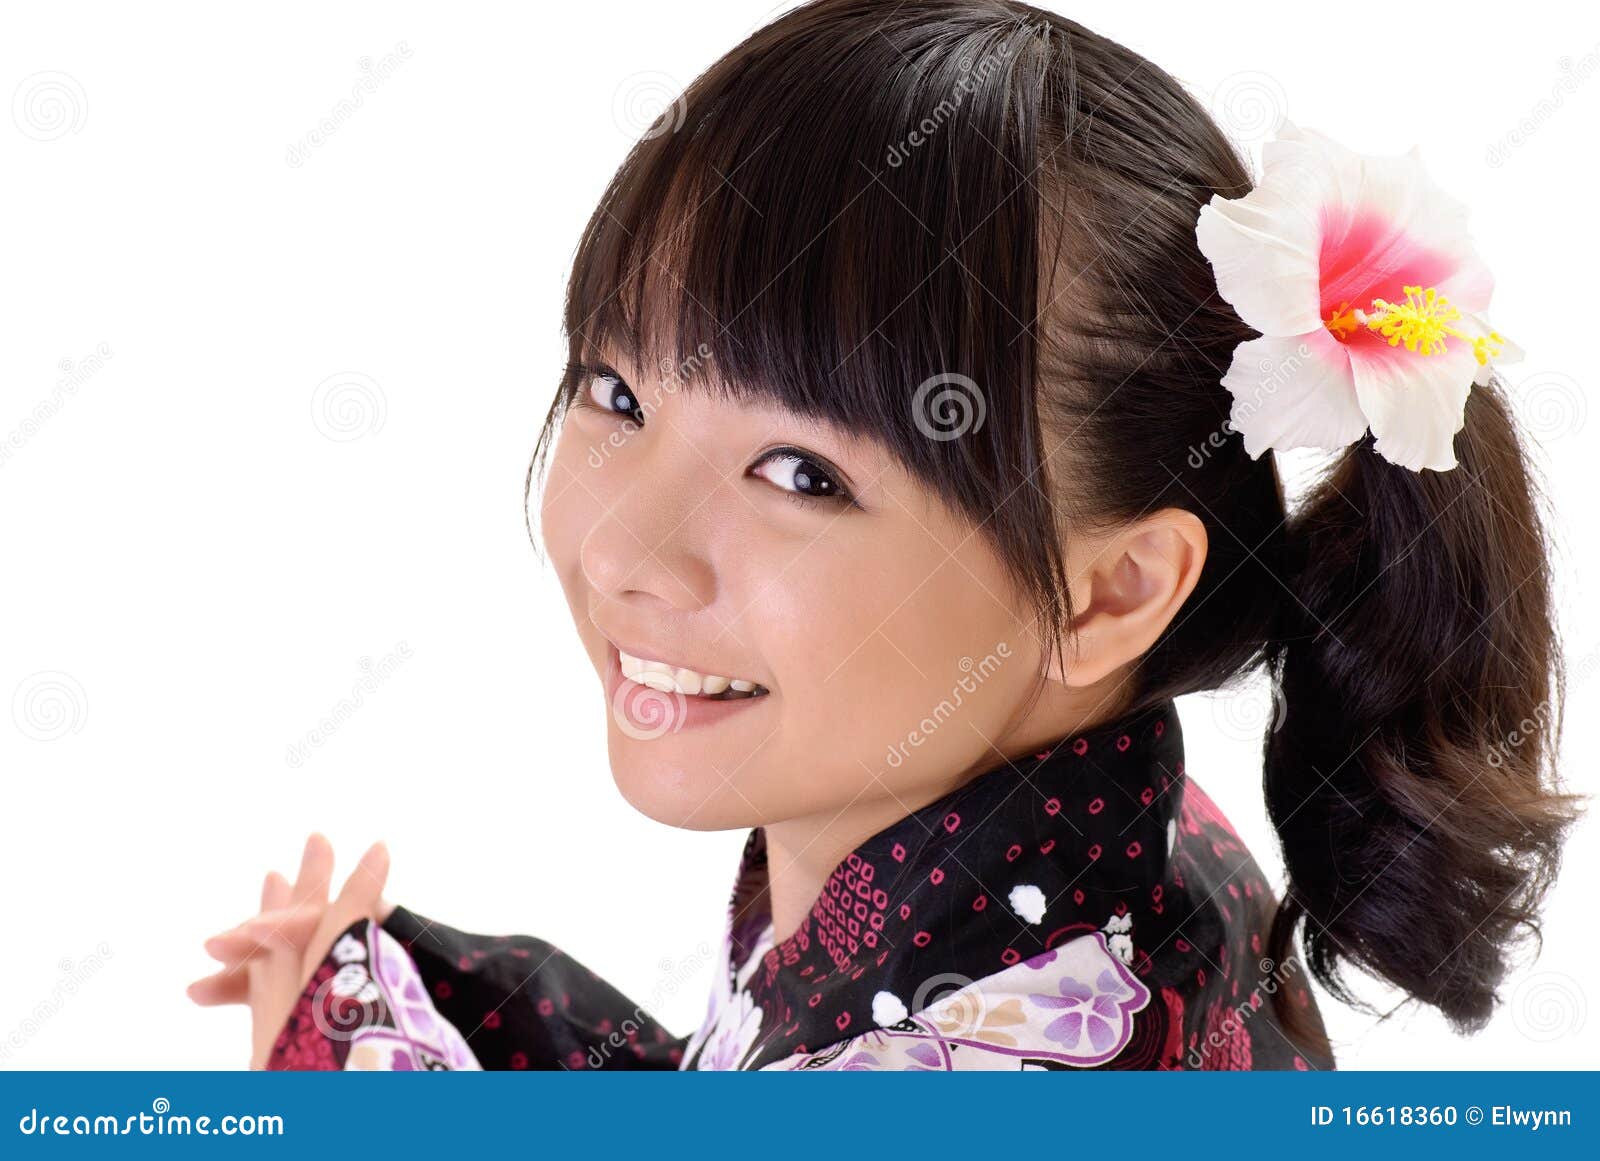 215 942 Japanese Girl Photos Free Royalty Free Stock Photos From Dreamstime